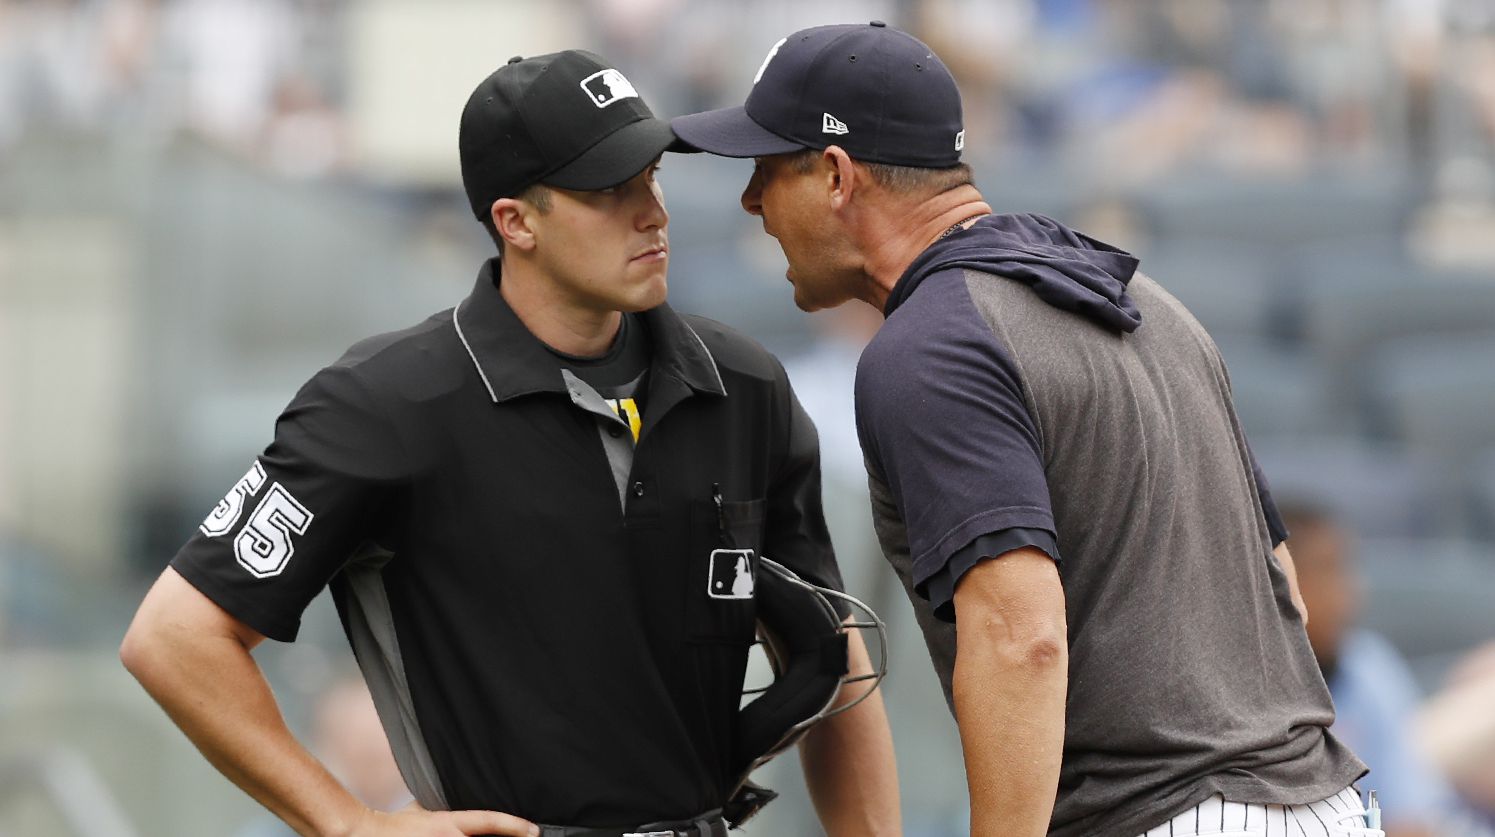 Yankees manager Aaron Boone ejected after bizarre review in first